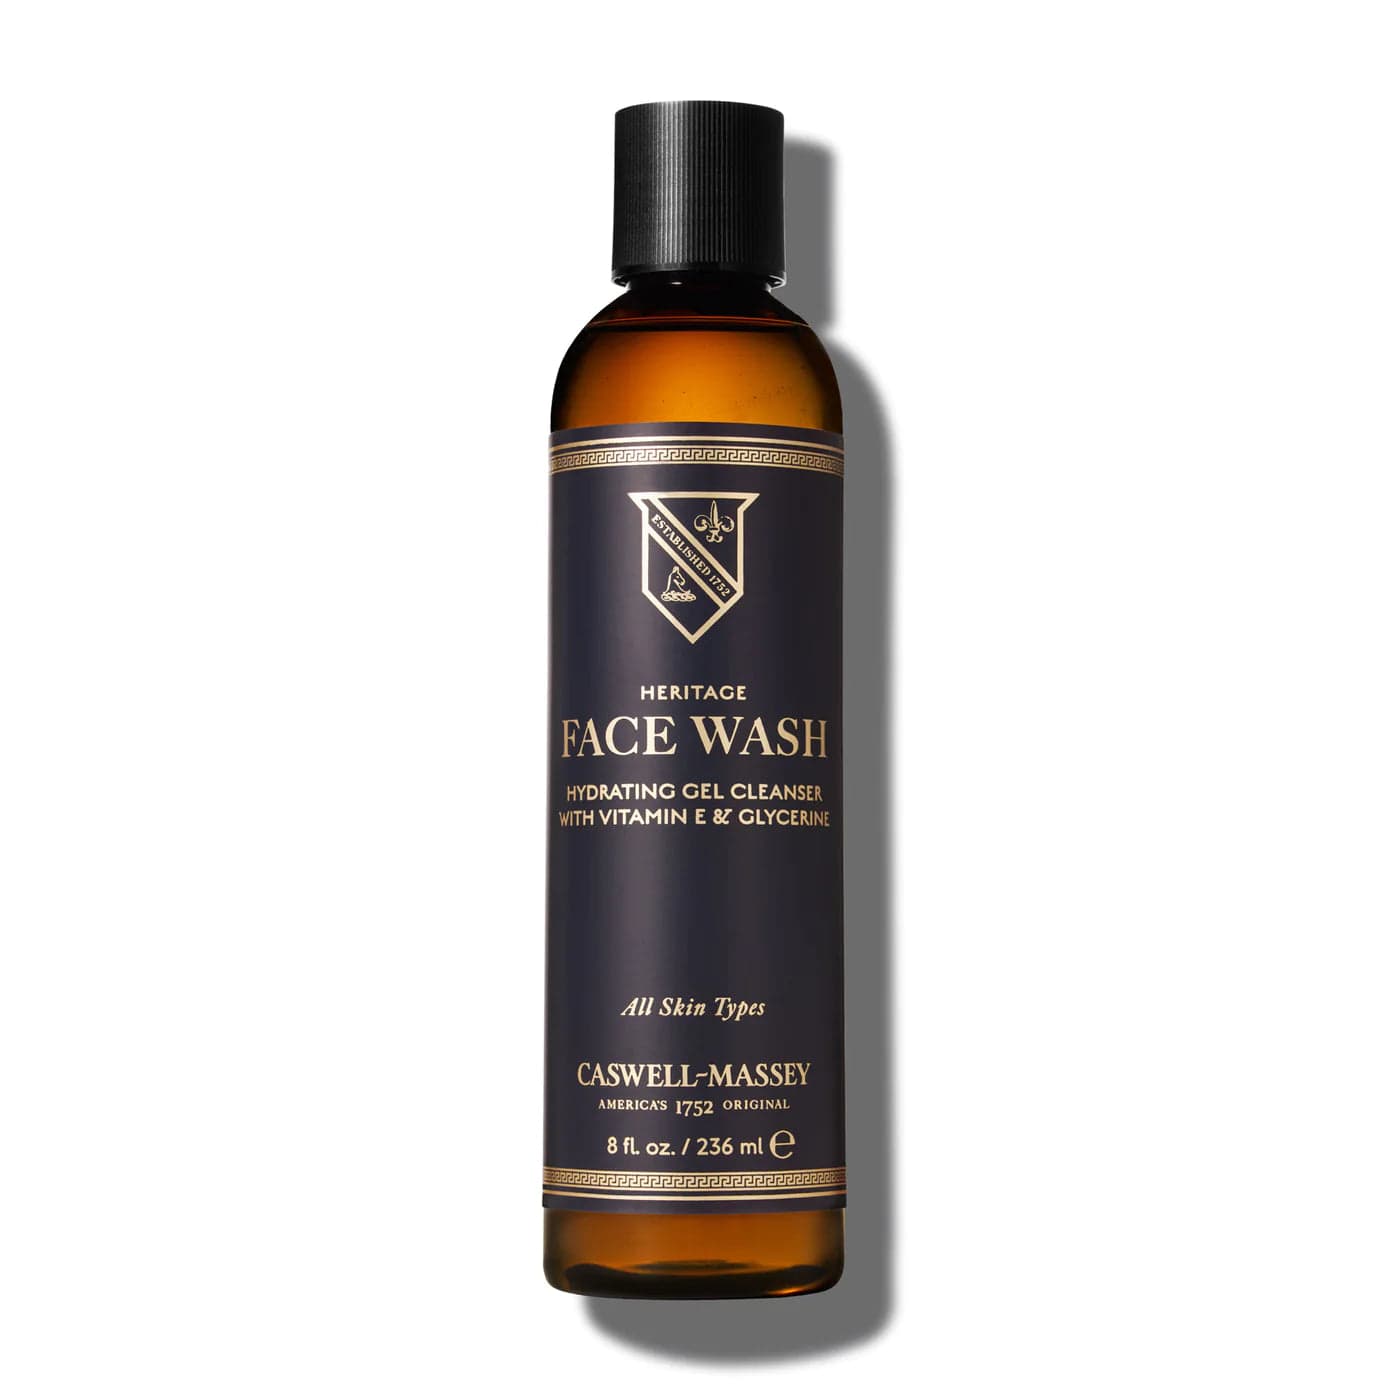 Planters Exchange Caswell Massey - Heritage Face Wash - 8oz